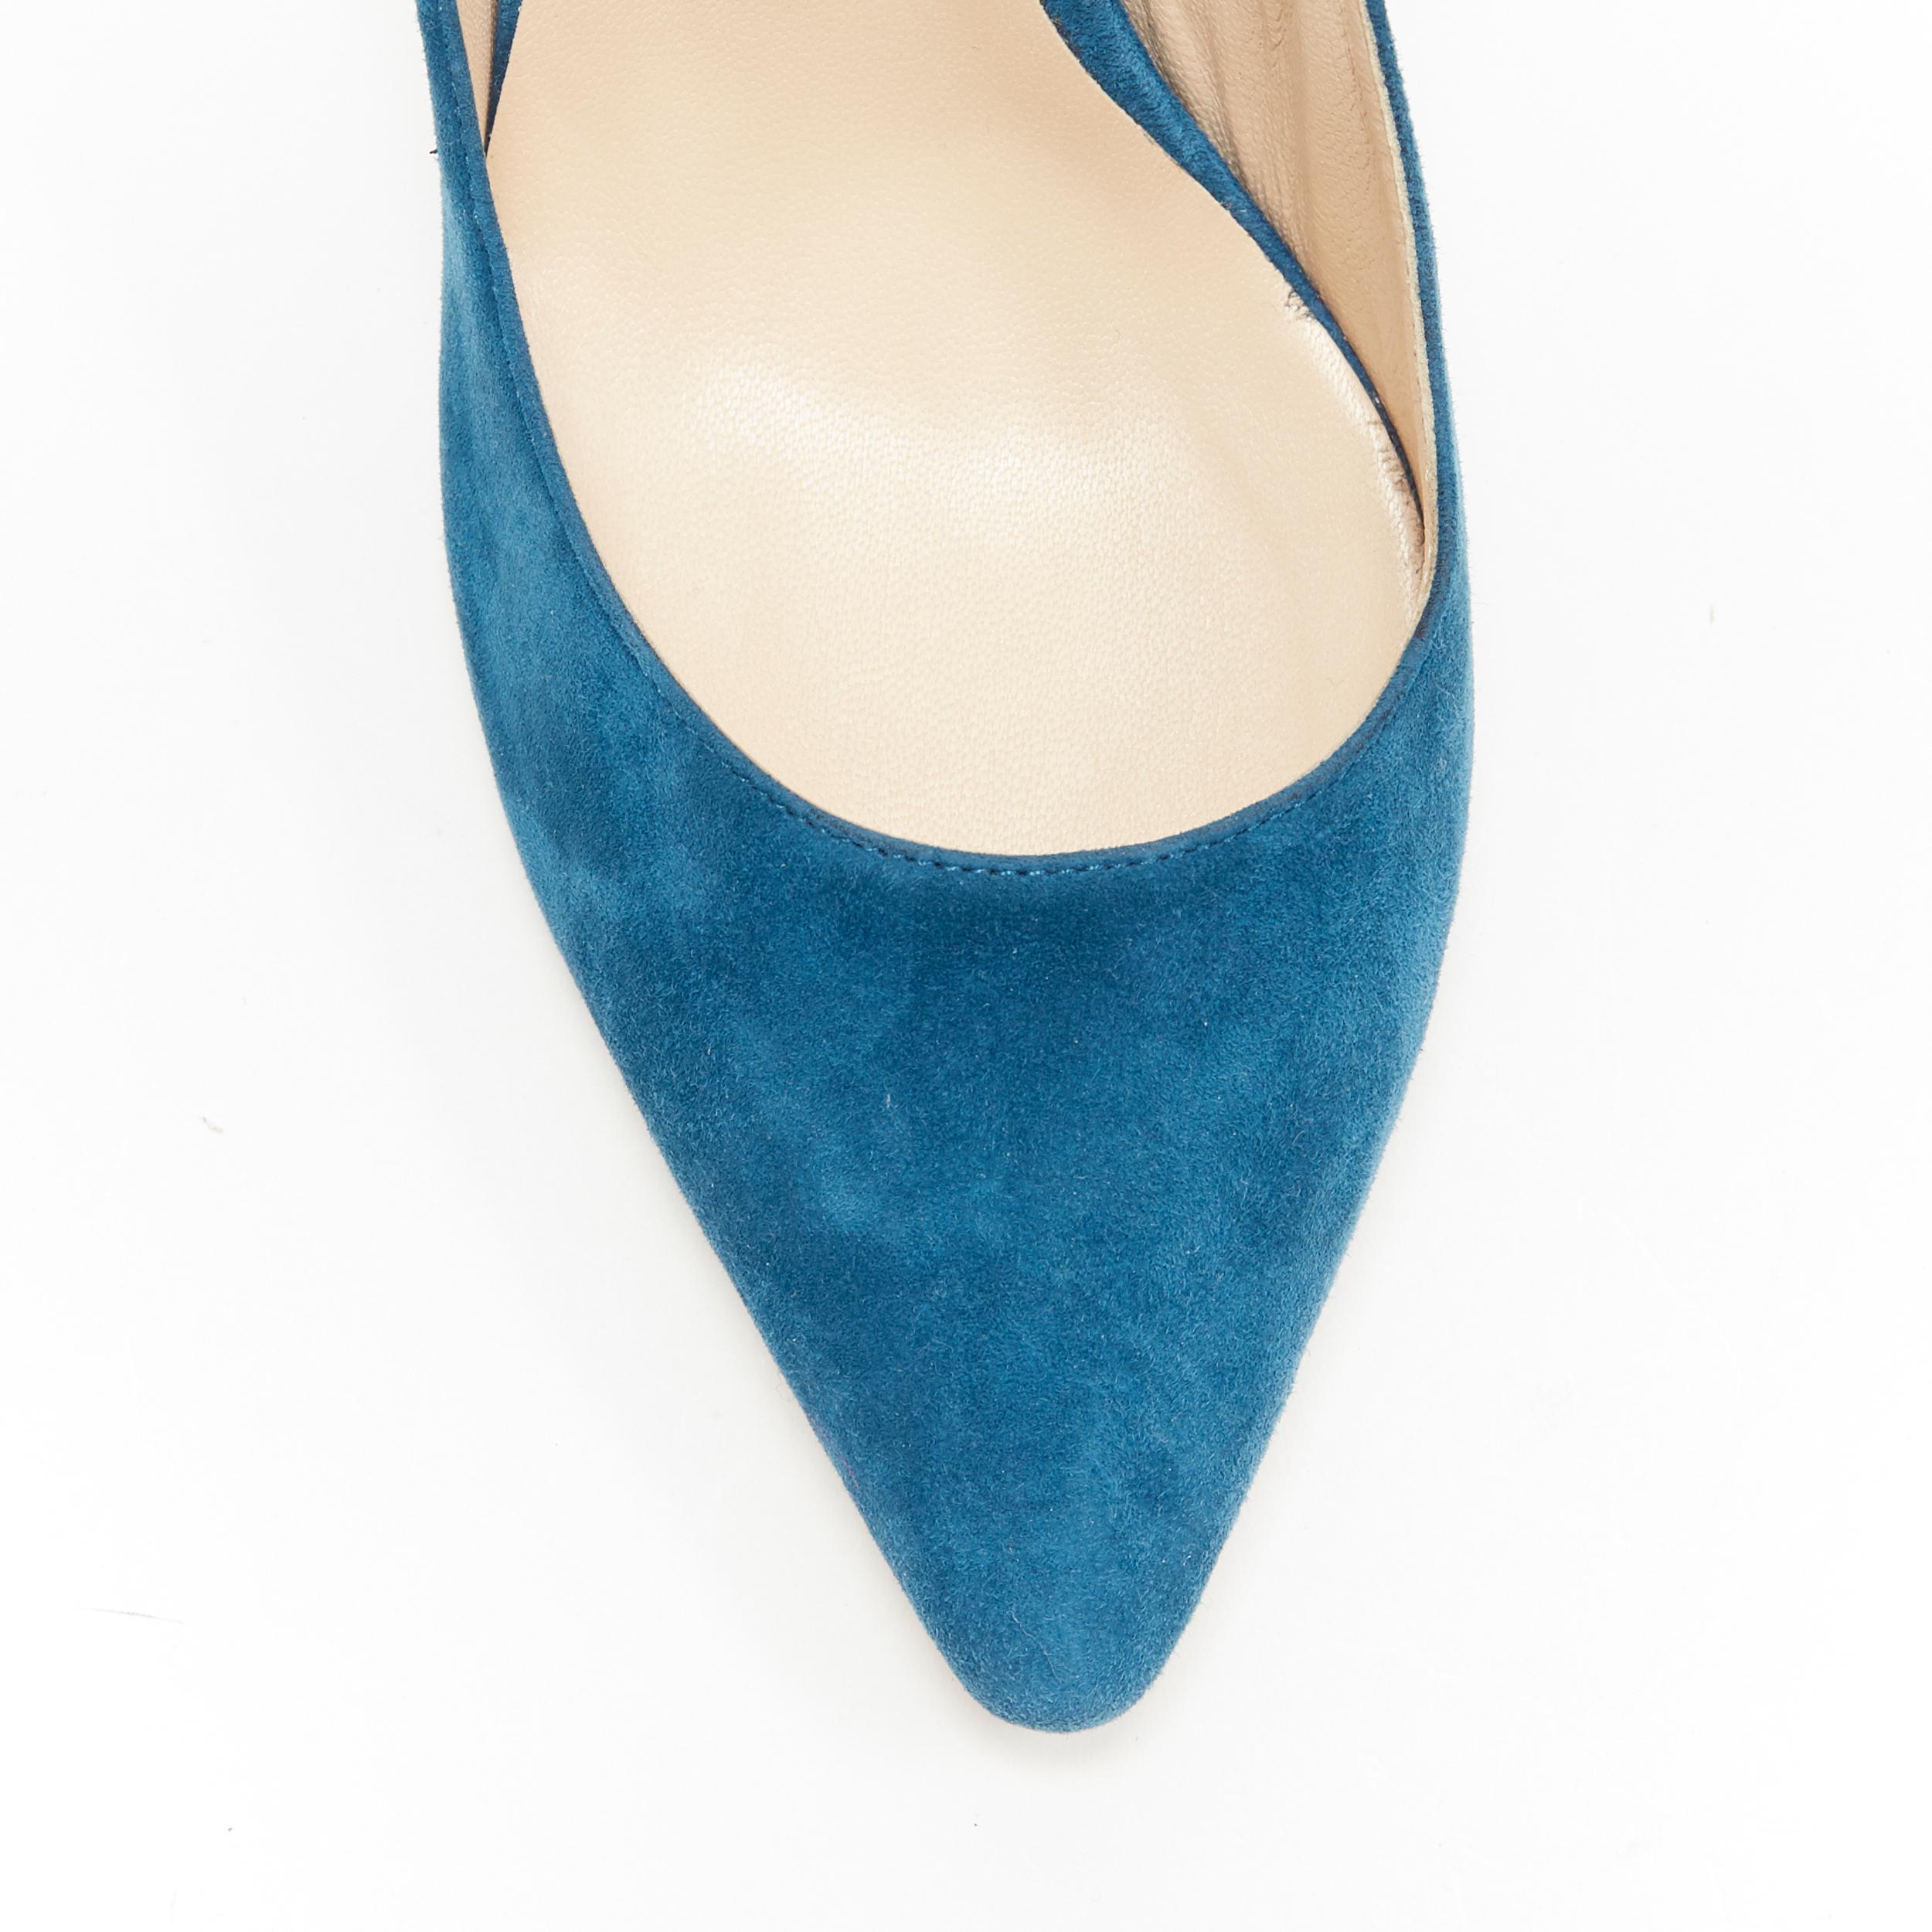 JIMMY CHOO Romy 85 teal blue suede leather point toe pigalle pump EU37 1